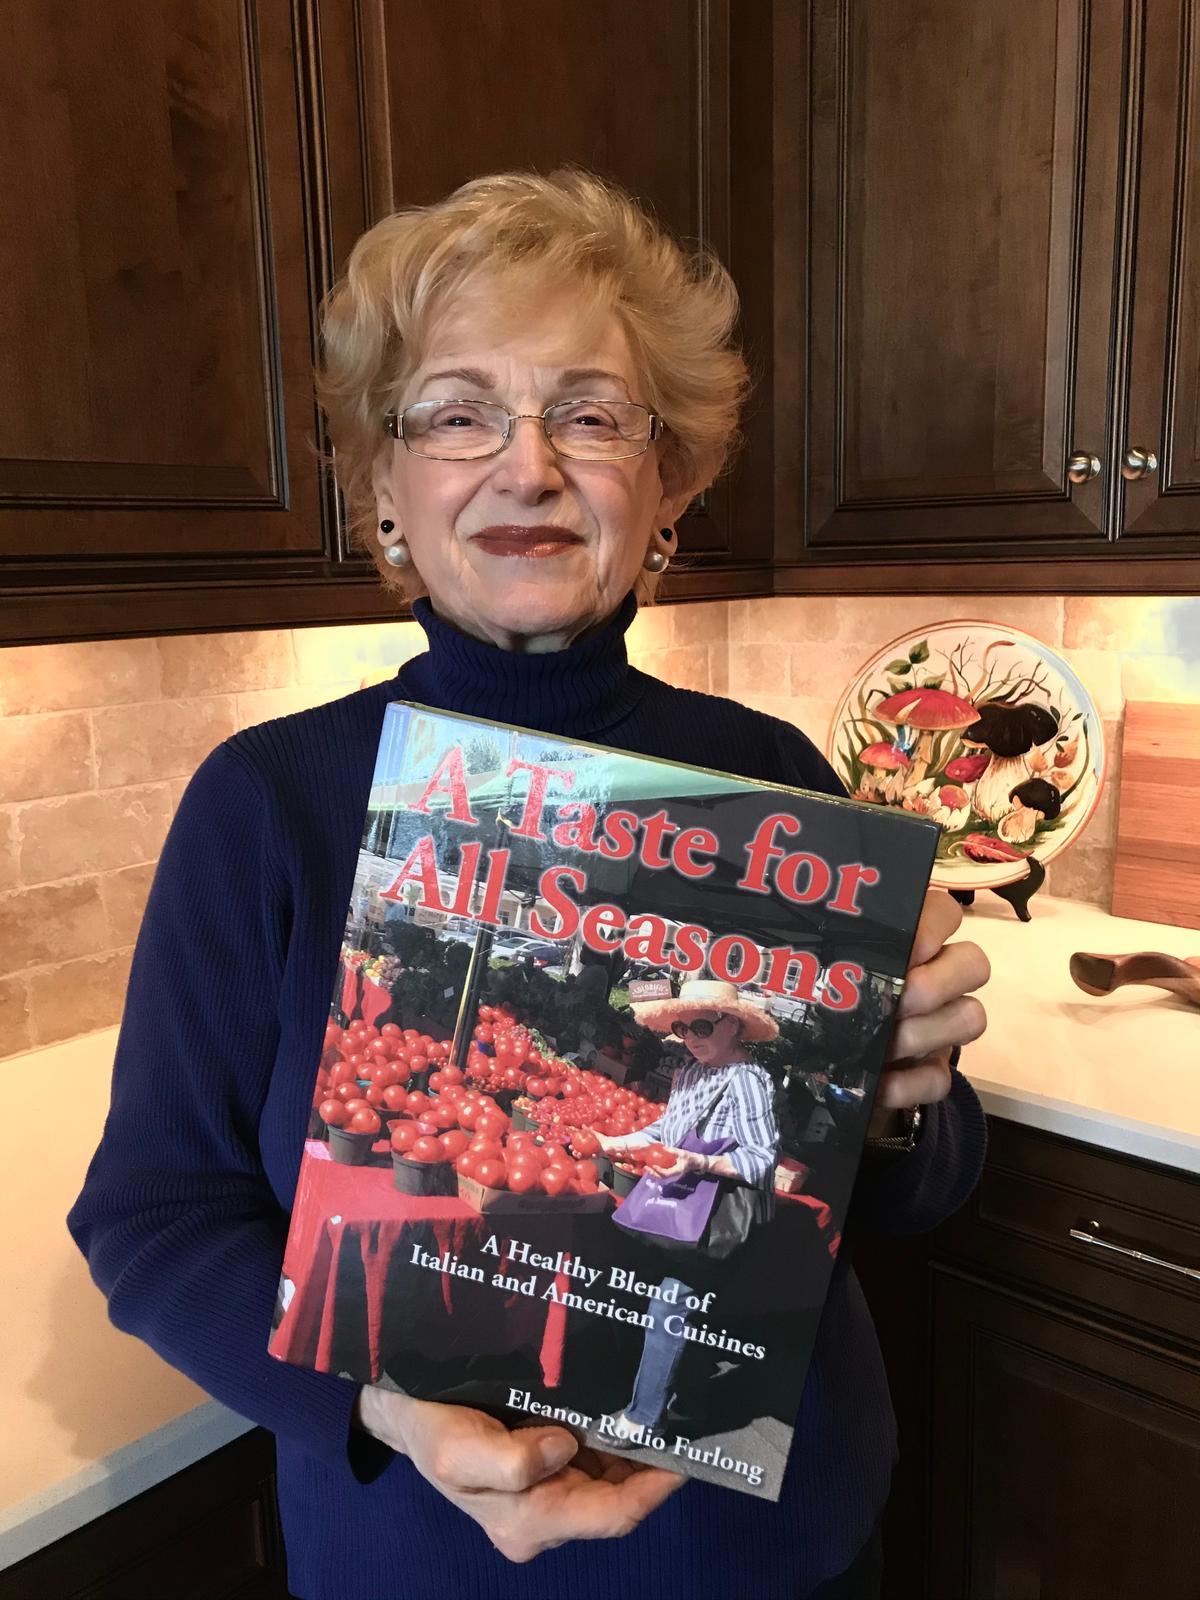 The author with her cookbook, "A Taste for All Seasons," published Feb. 2021. The book is a collection of recipes, family traditions, and memories from her Italian-American upbringing, travels through Italy, and decades of cooking for family and friends. (Courtesy of Eleanor Rodio Furlong)